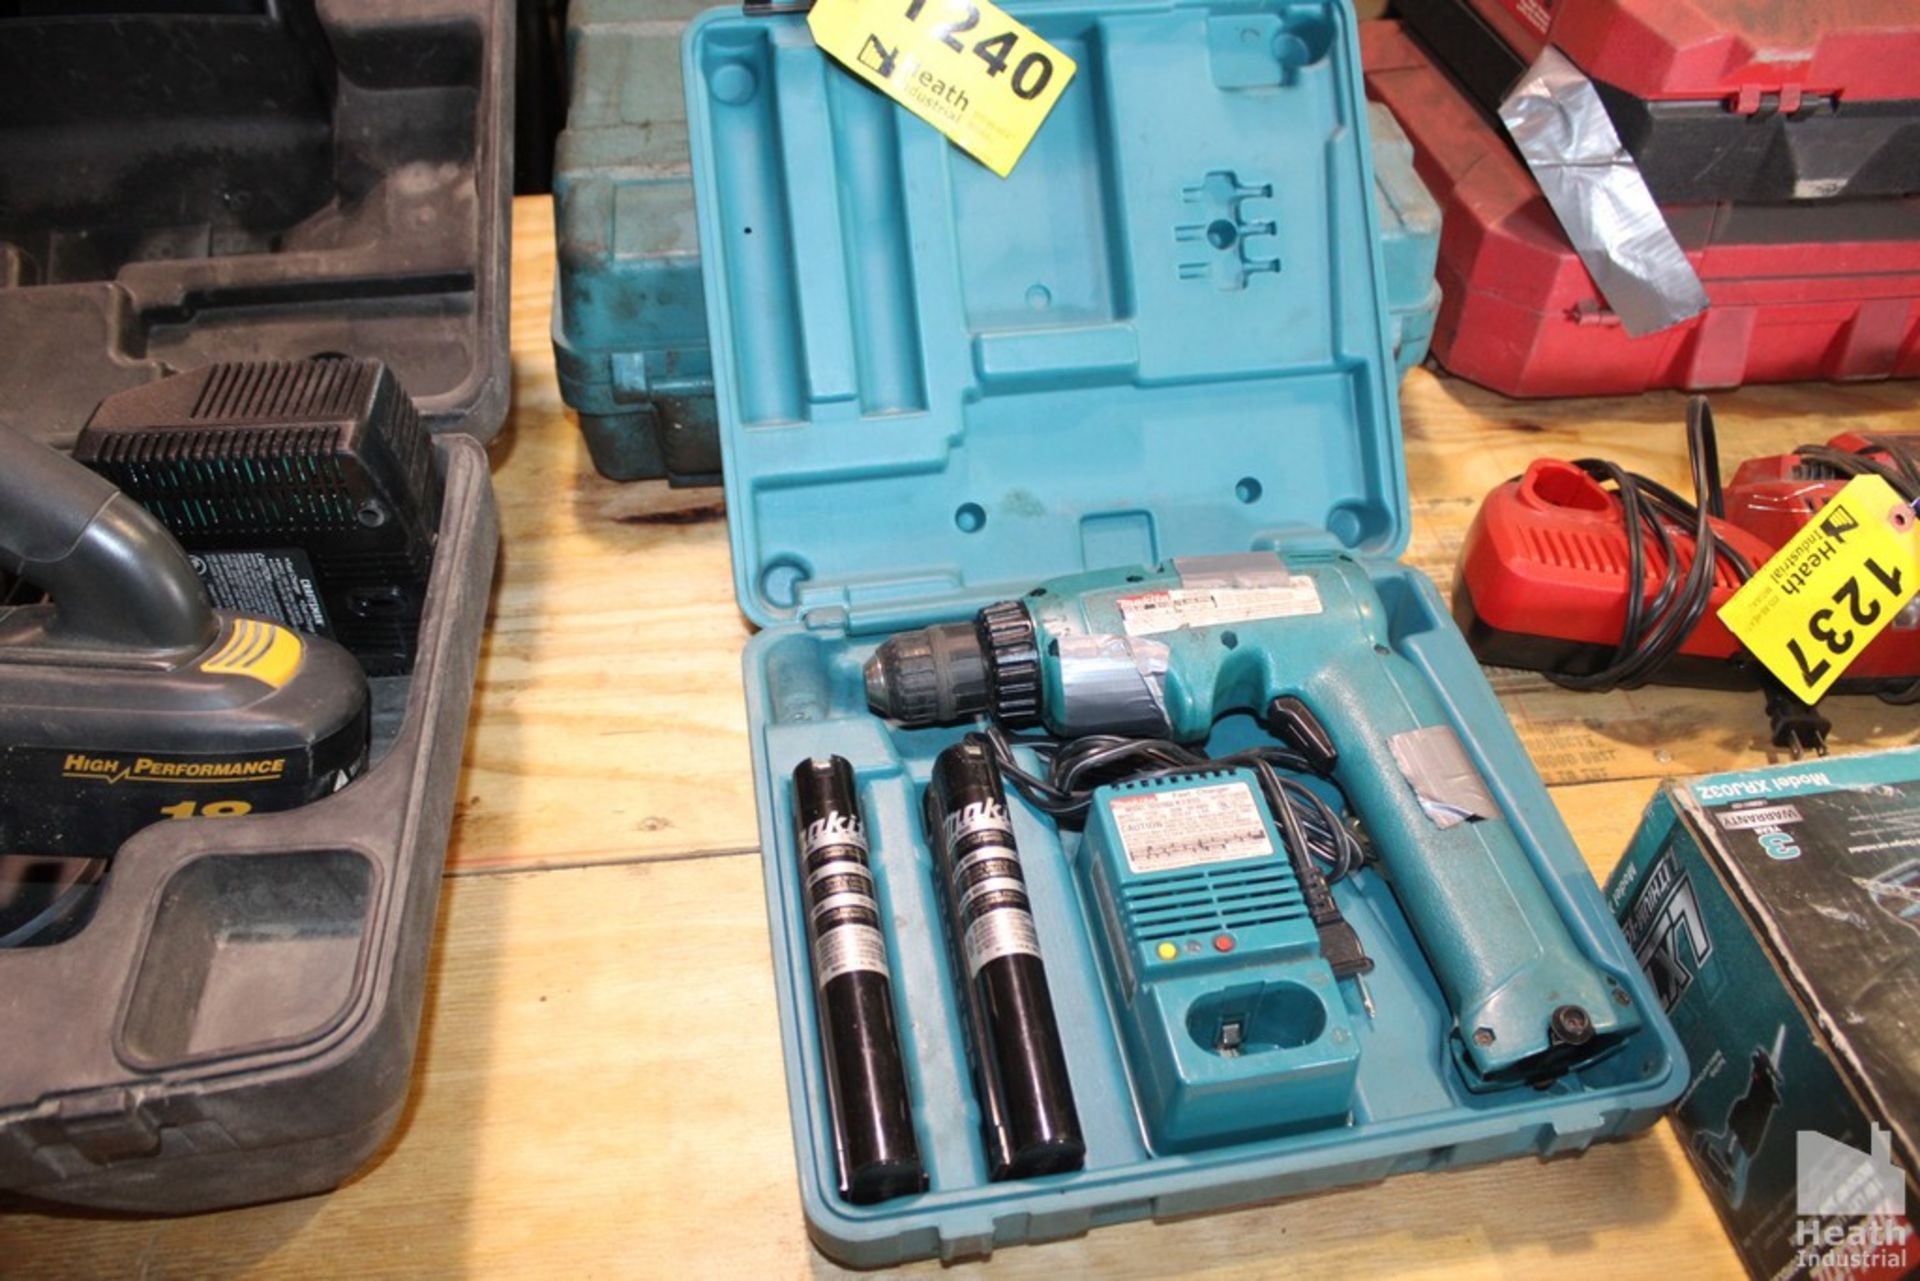 MAKITA 9.6 VOLT CORDLESS DRILL DRIVER WITH TWO BATTERIES AND CHARGER